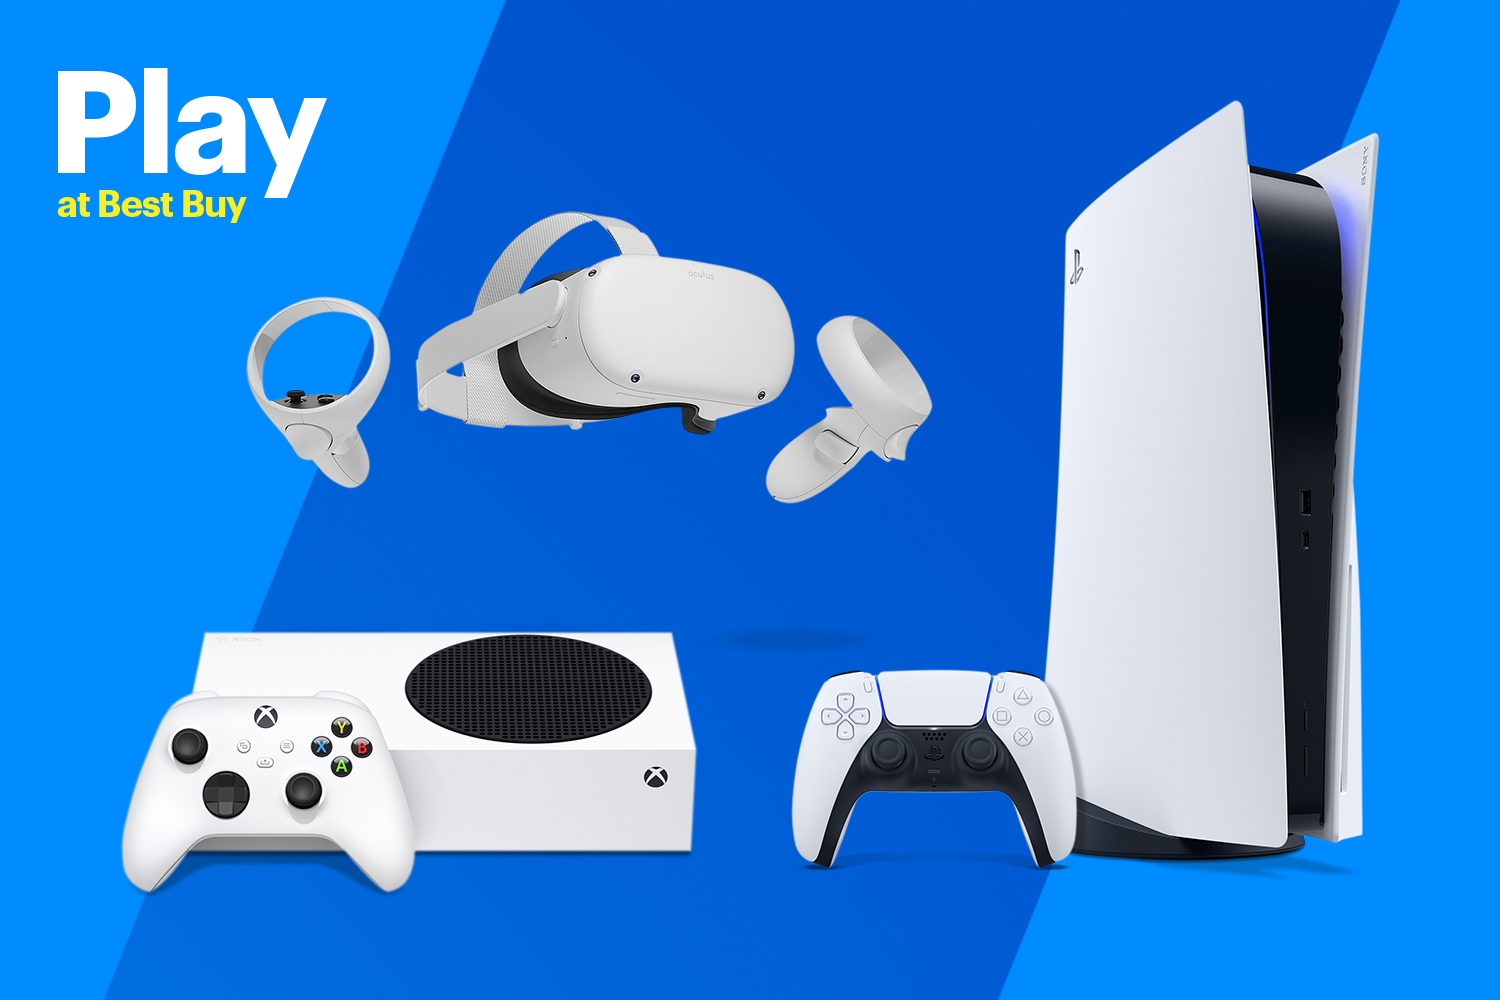 Enter For A Chance To Win Great Prizes With The Play At Best Buy Gaming Contest Best Buy Blog